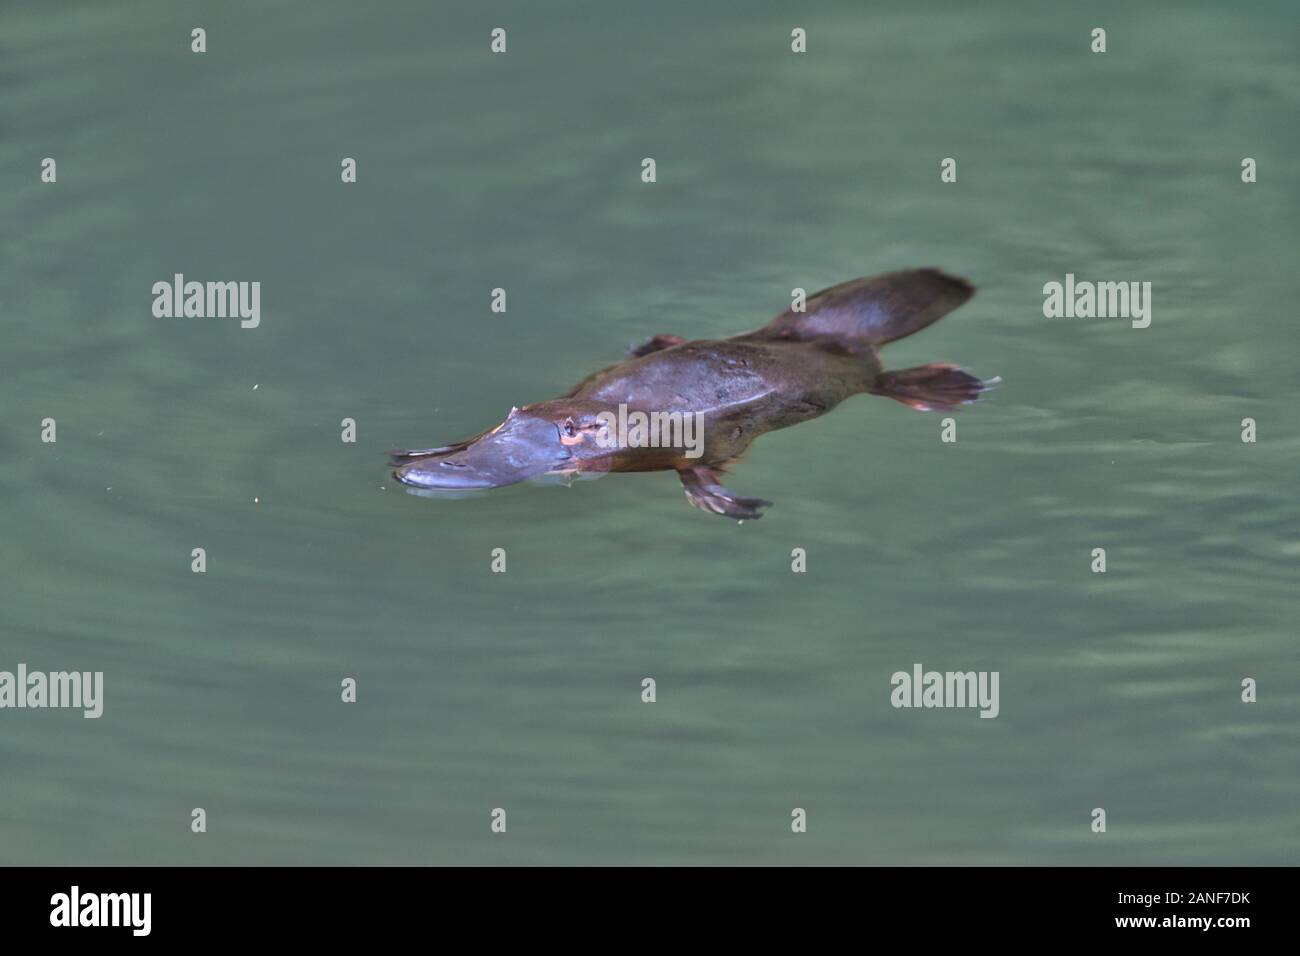 A single Platypus(Ornithorhynchus) floats on the stream's surface in Carnarvon Gorge National Park, Queensland. Stock Photo